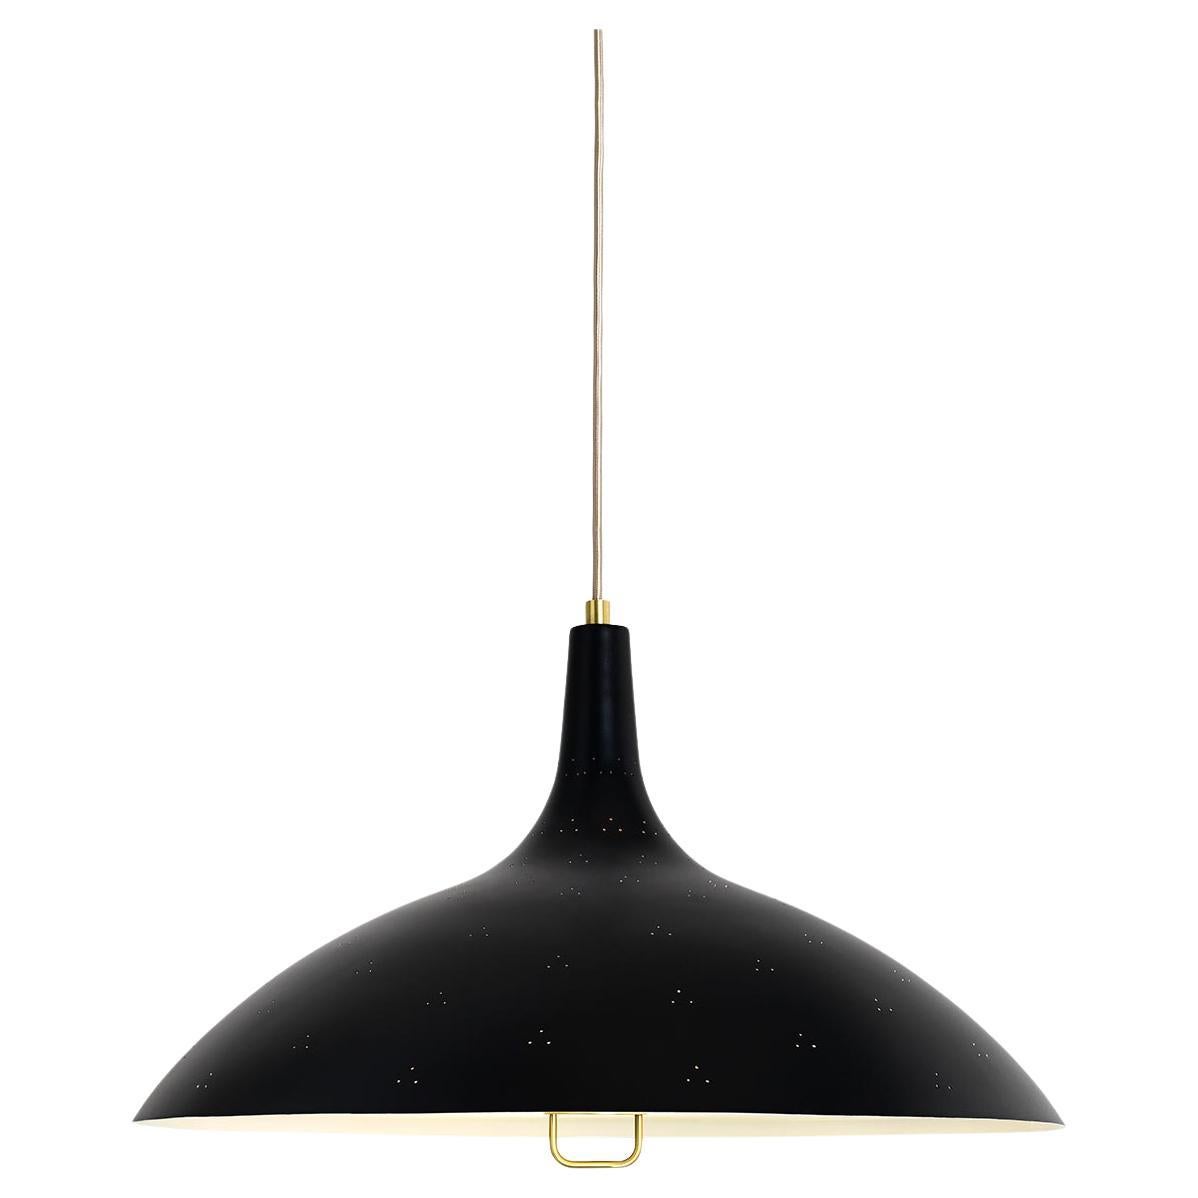 The 1965 Pendant was originally designed by Paavo Tynell in 1947. Like many of his bestknown designs, the pendant was designed for the Finland House in New York – one of the most ambitious and successful projects of all time to showcase Finnish